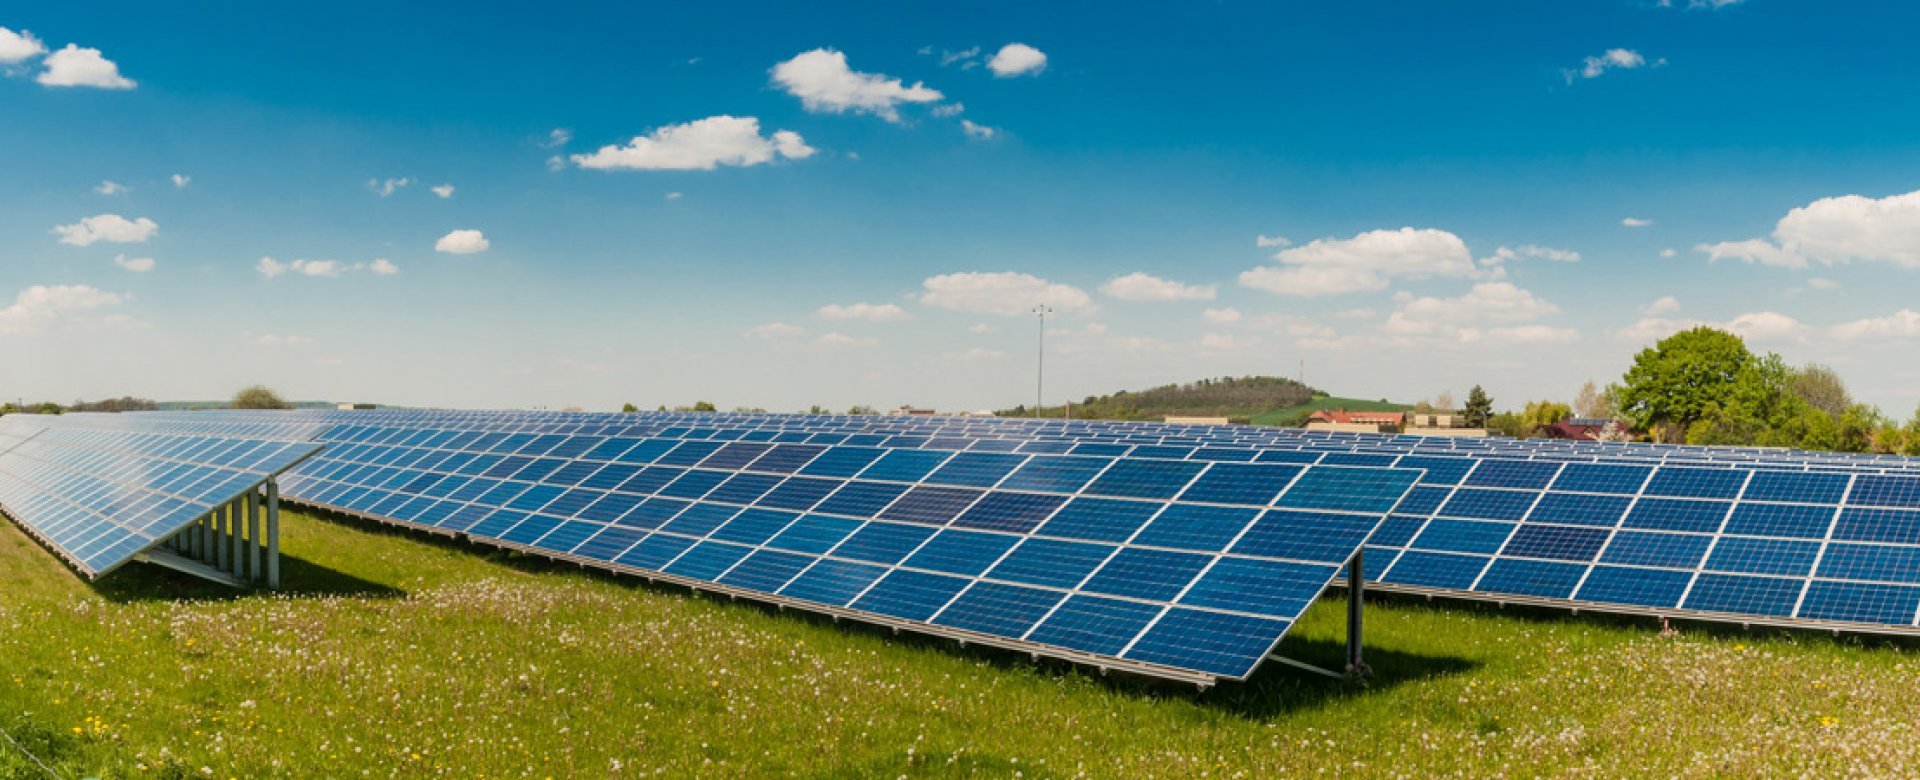 24 FIELD PHOTOVOLTAIC POWER PLANTS